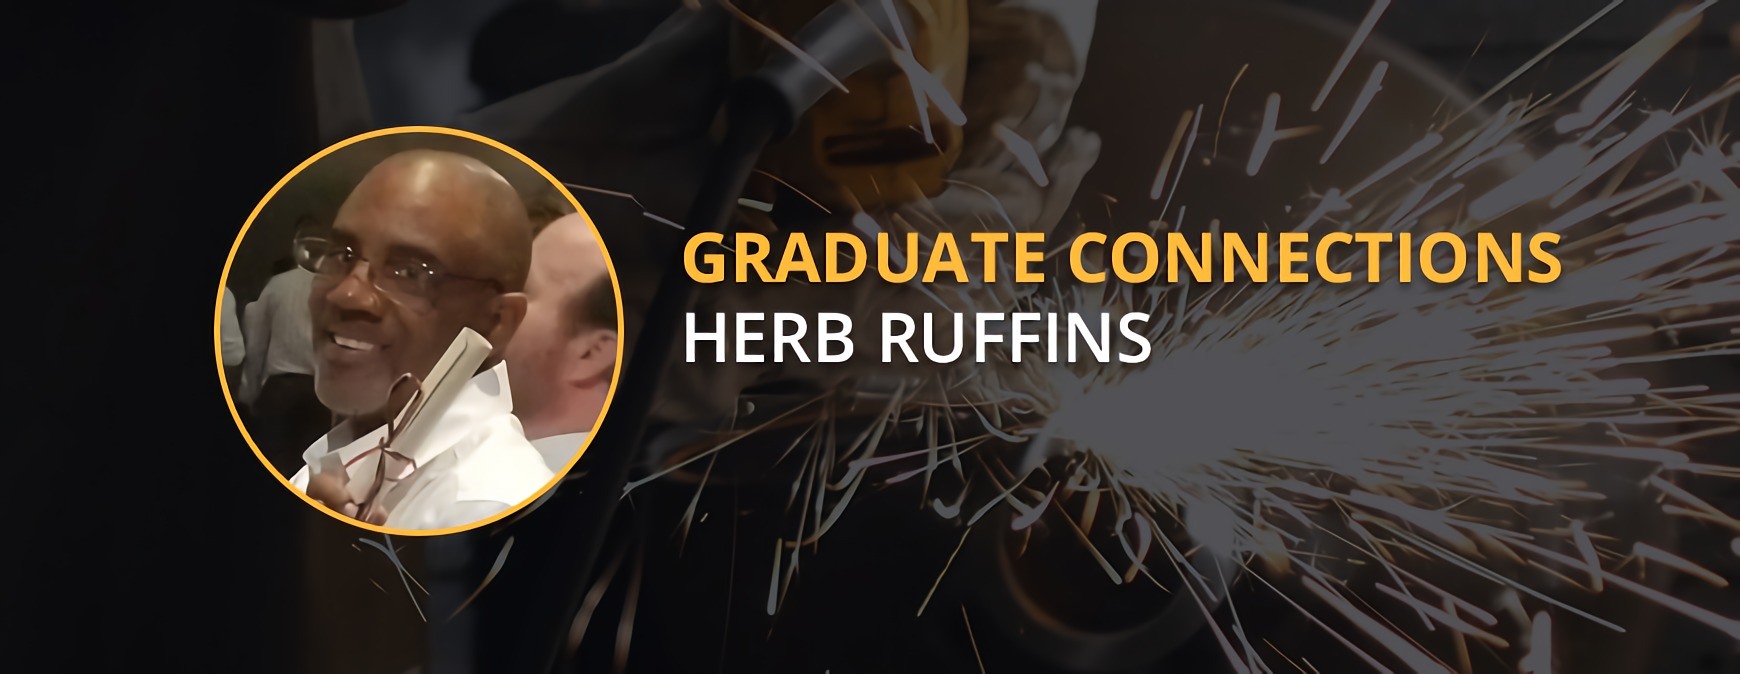 Herb Ruffins graduate connections